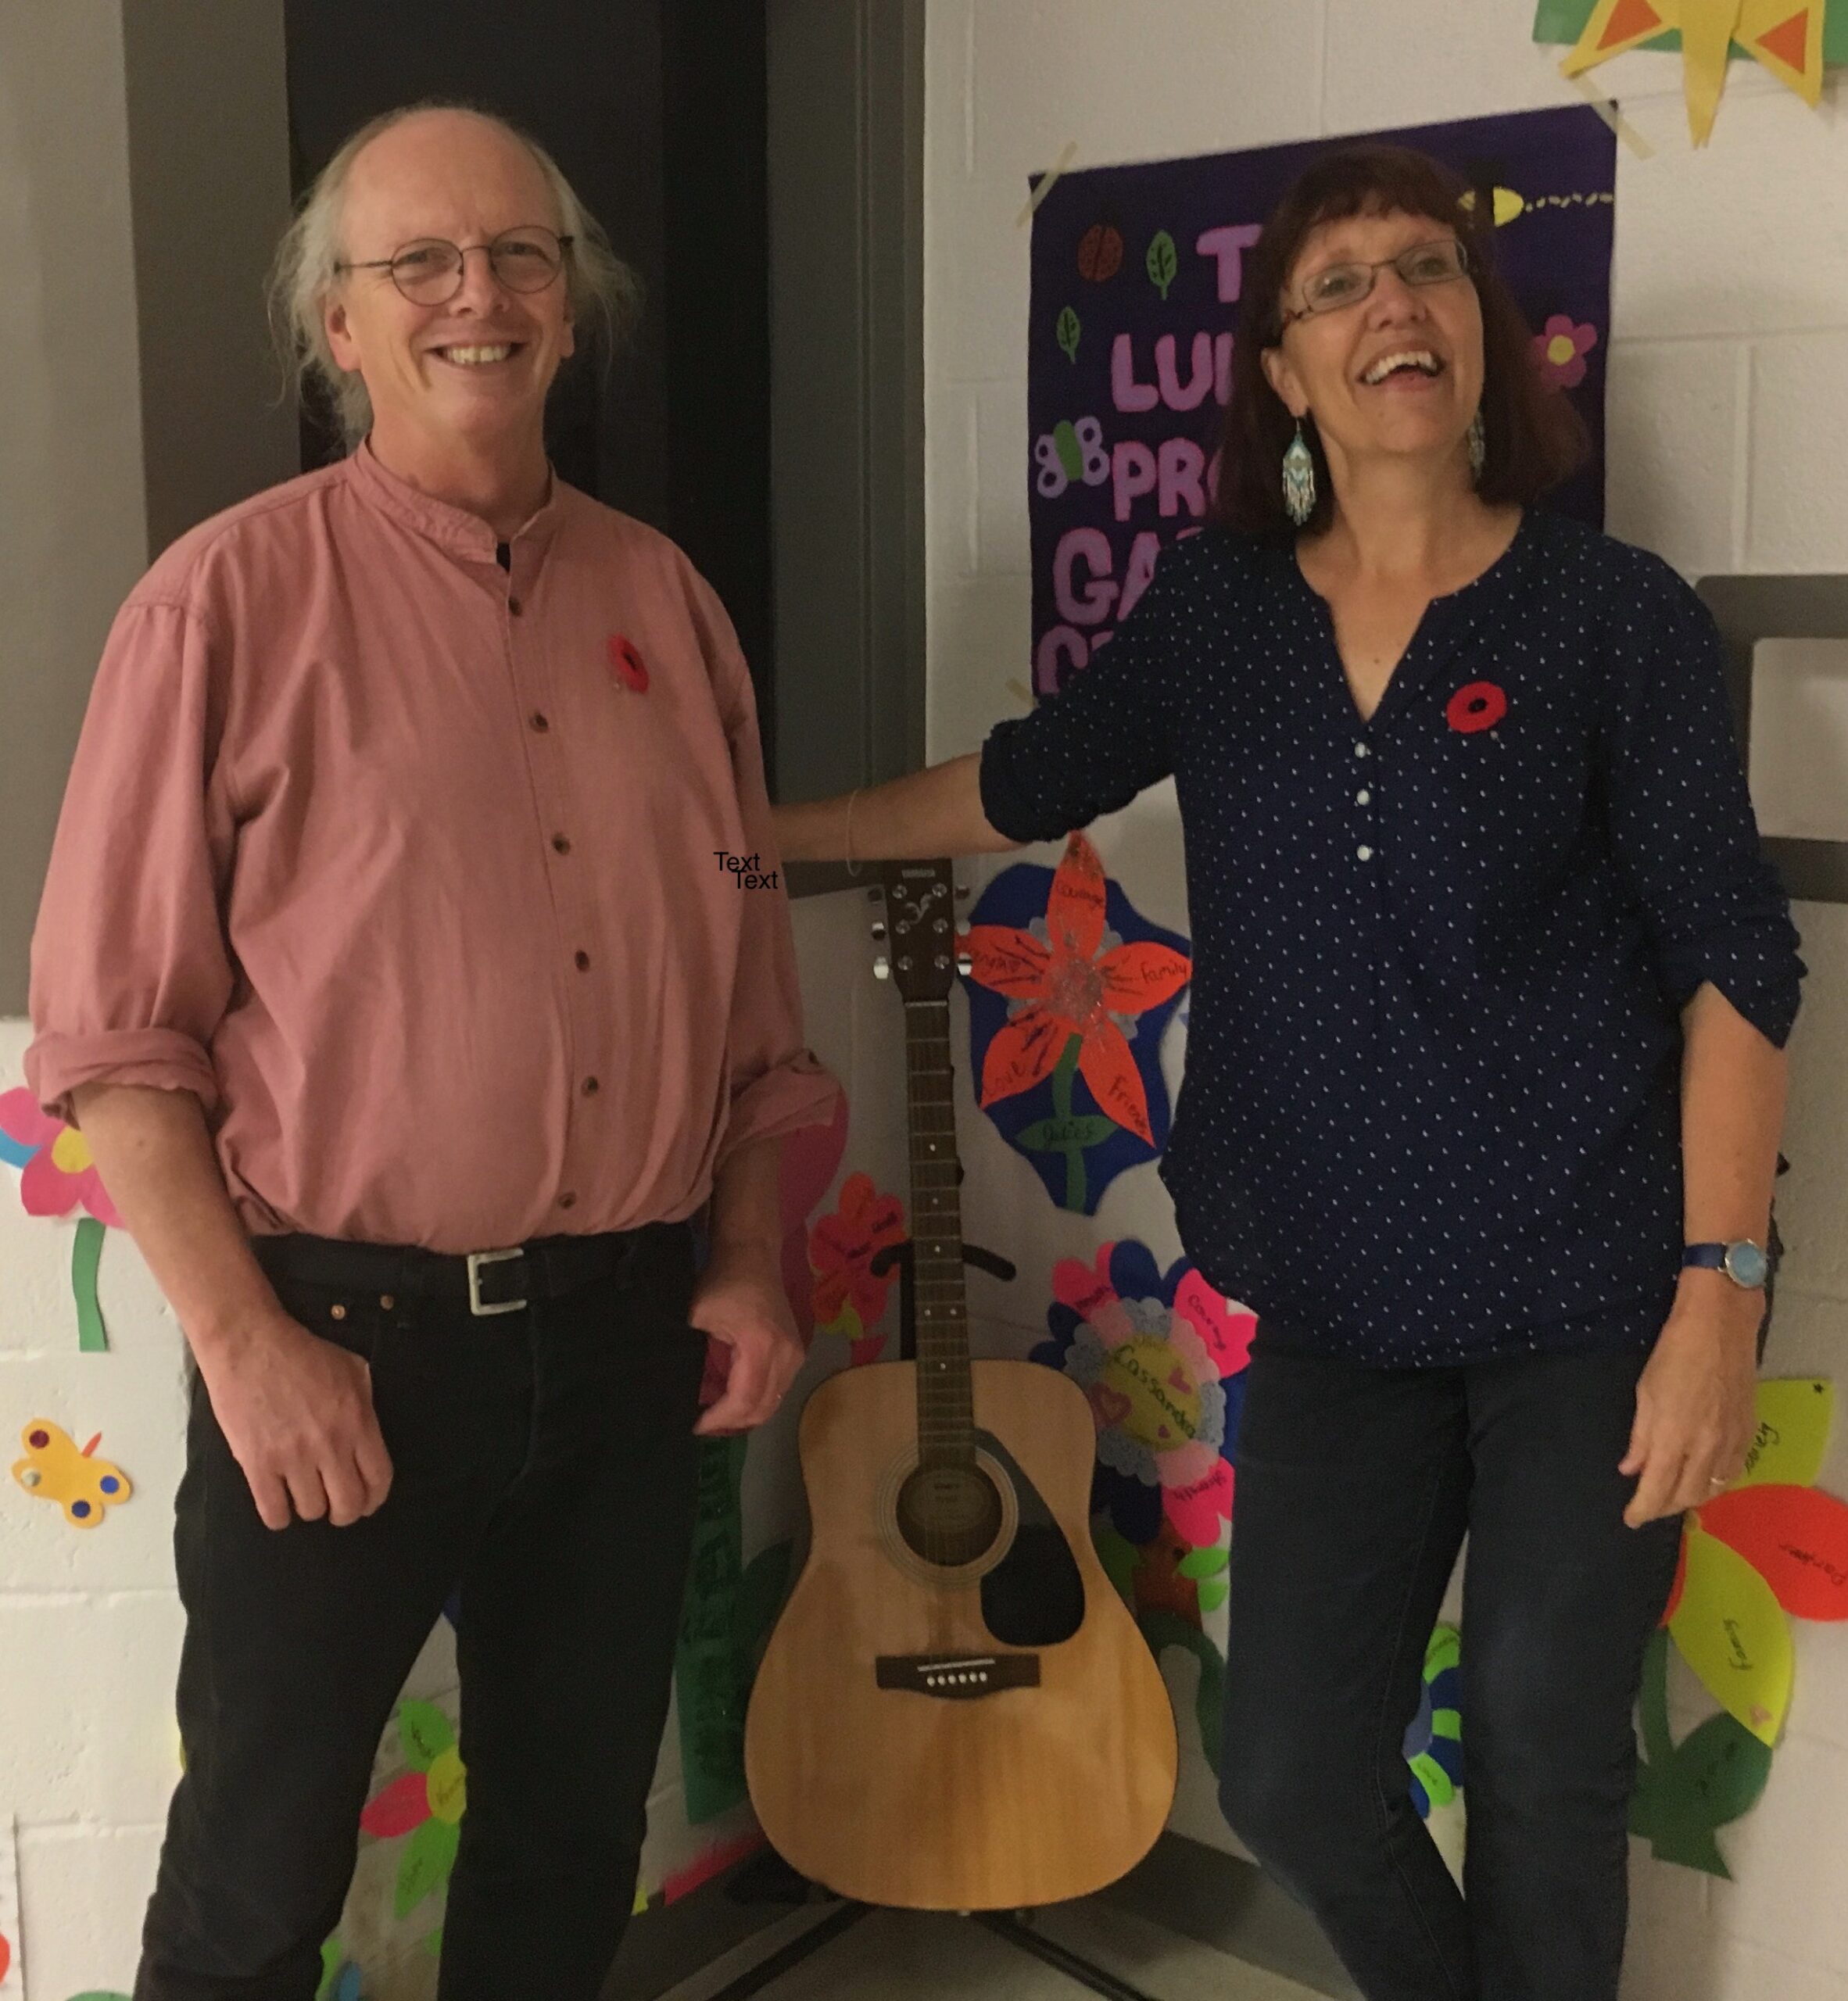 A smiling man and woman standing either side of a guitar.